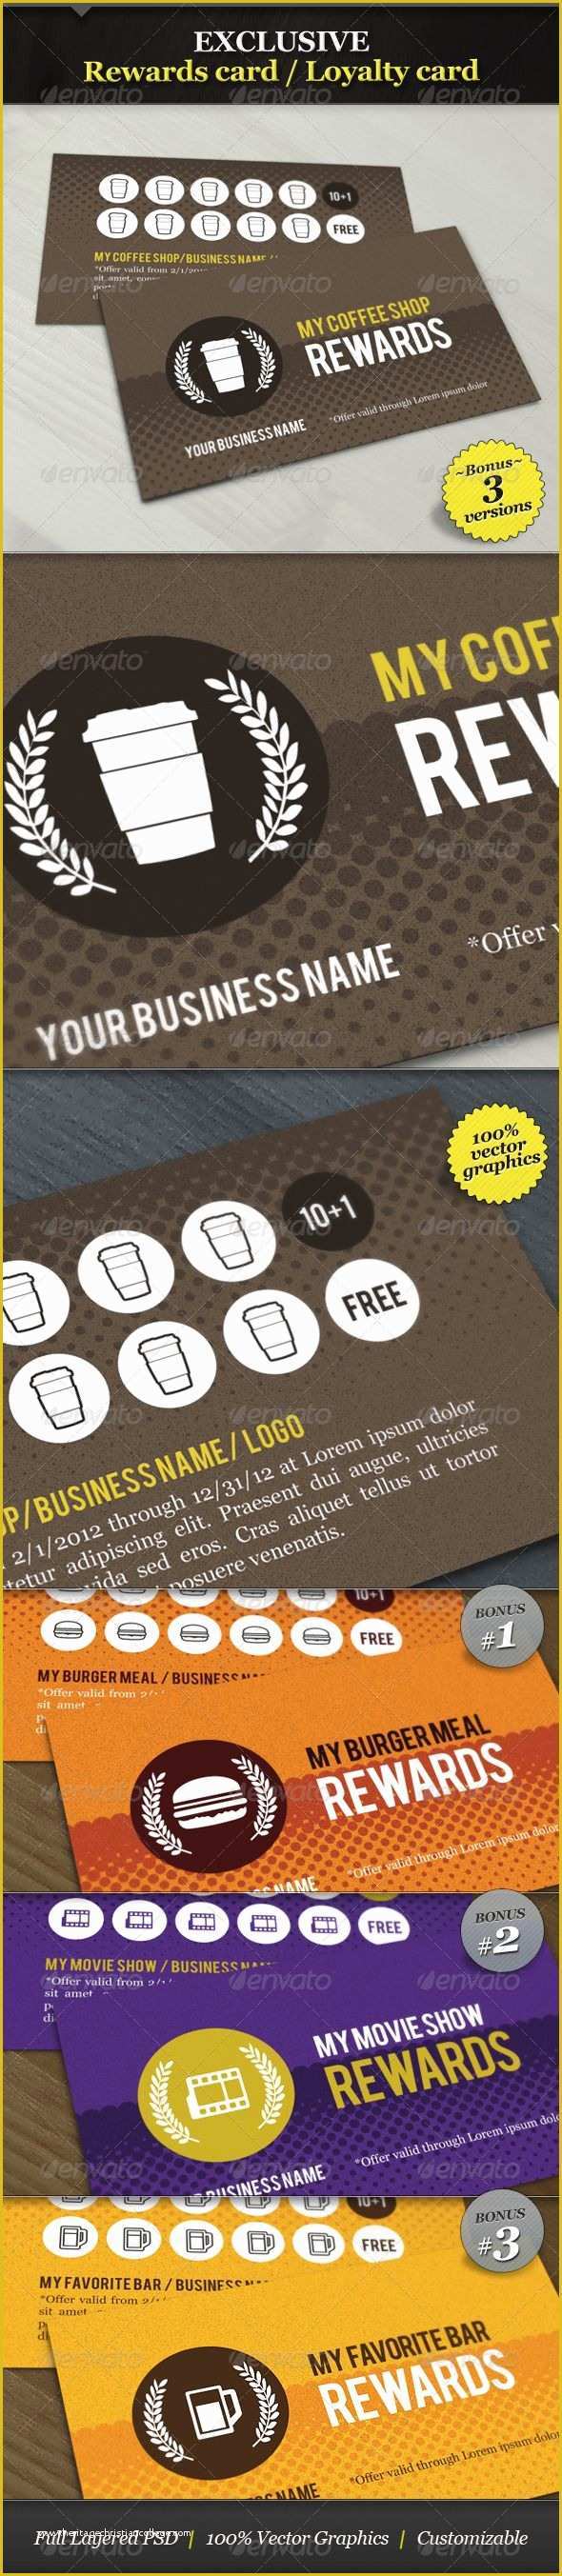 Loyalty Card Template Psd Free Of 25 Best Ideas About Loyalty Card Design On Pinterest